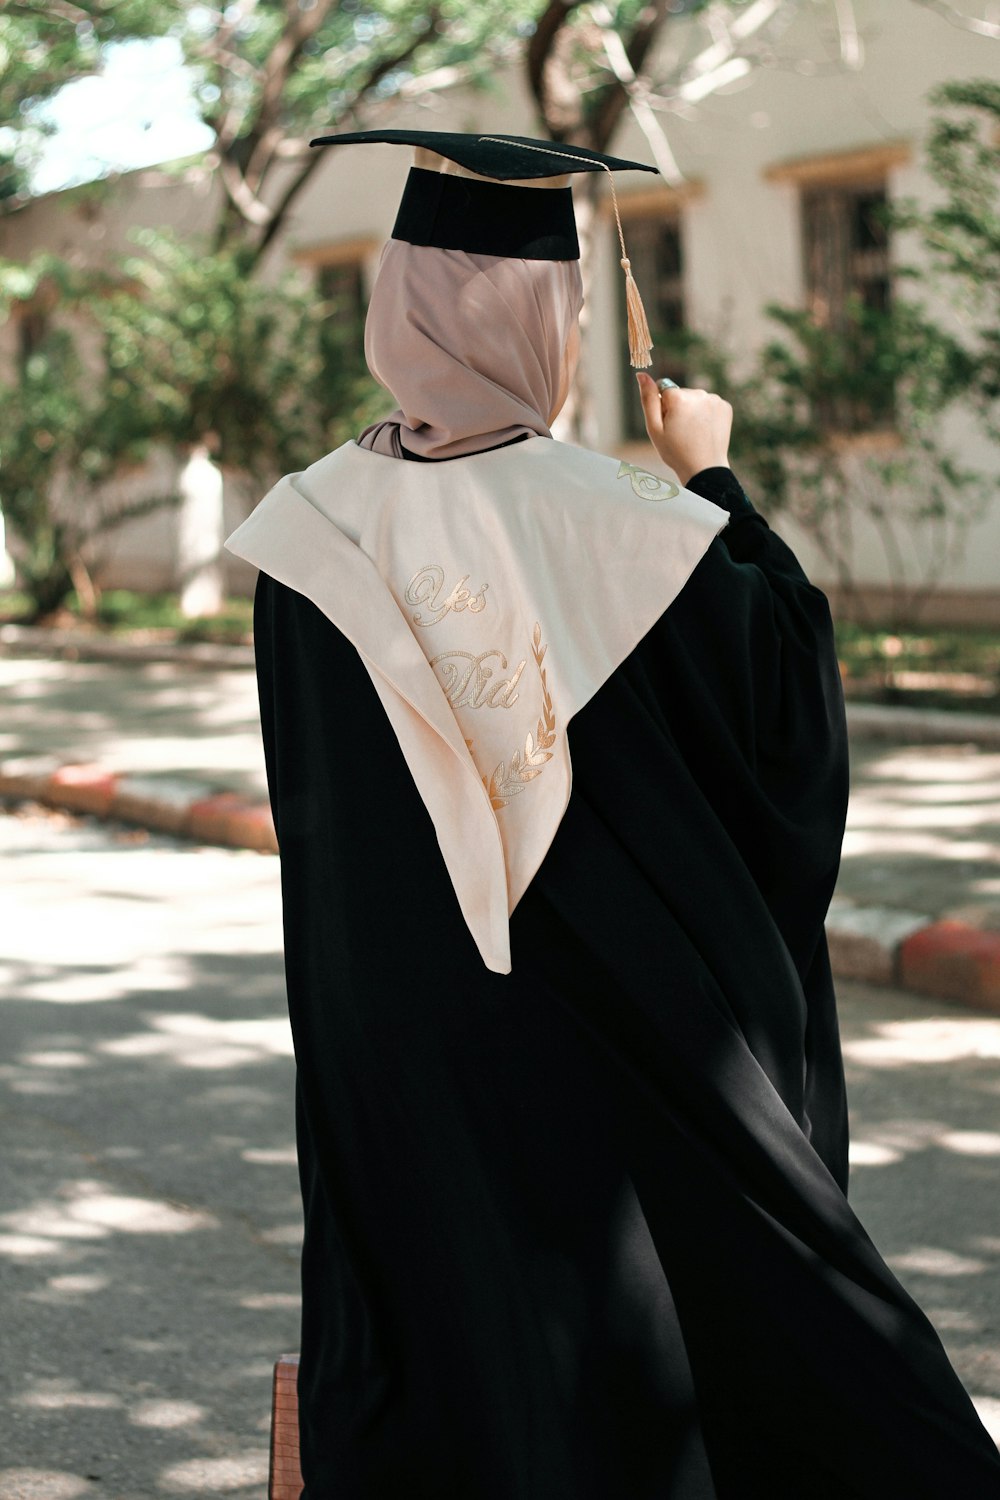 a woman in a graduation gown and cap